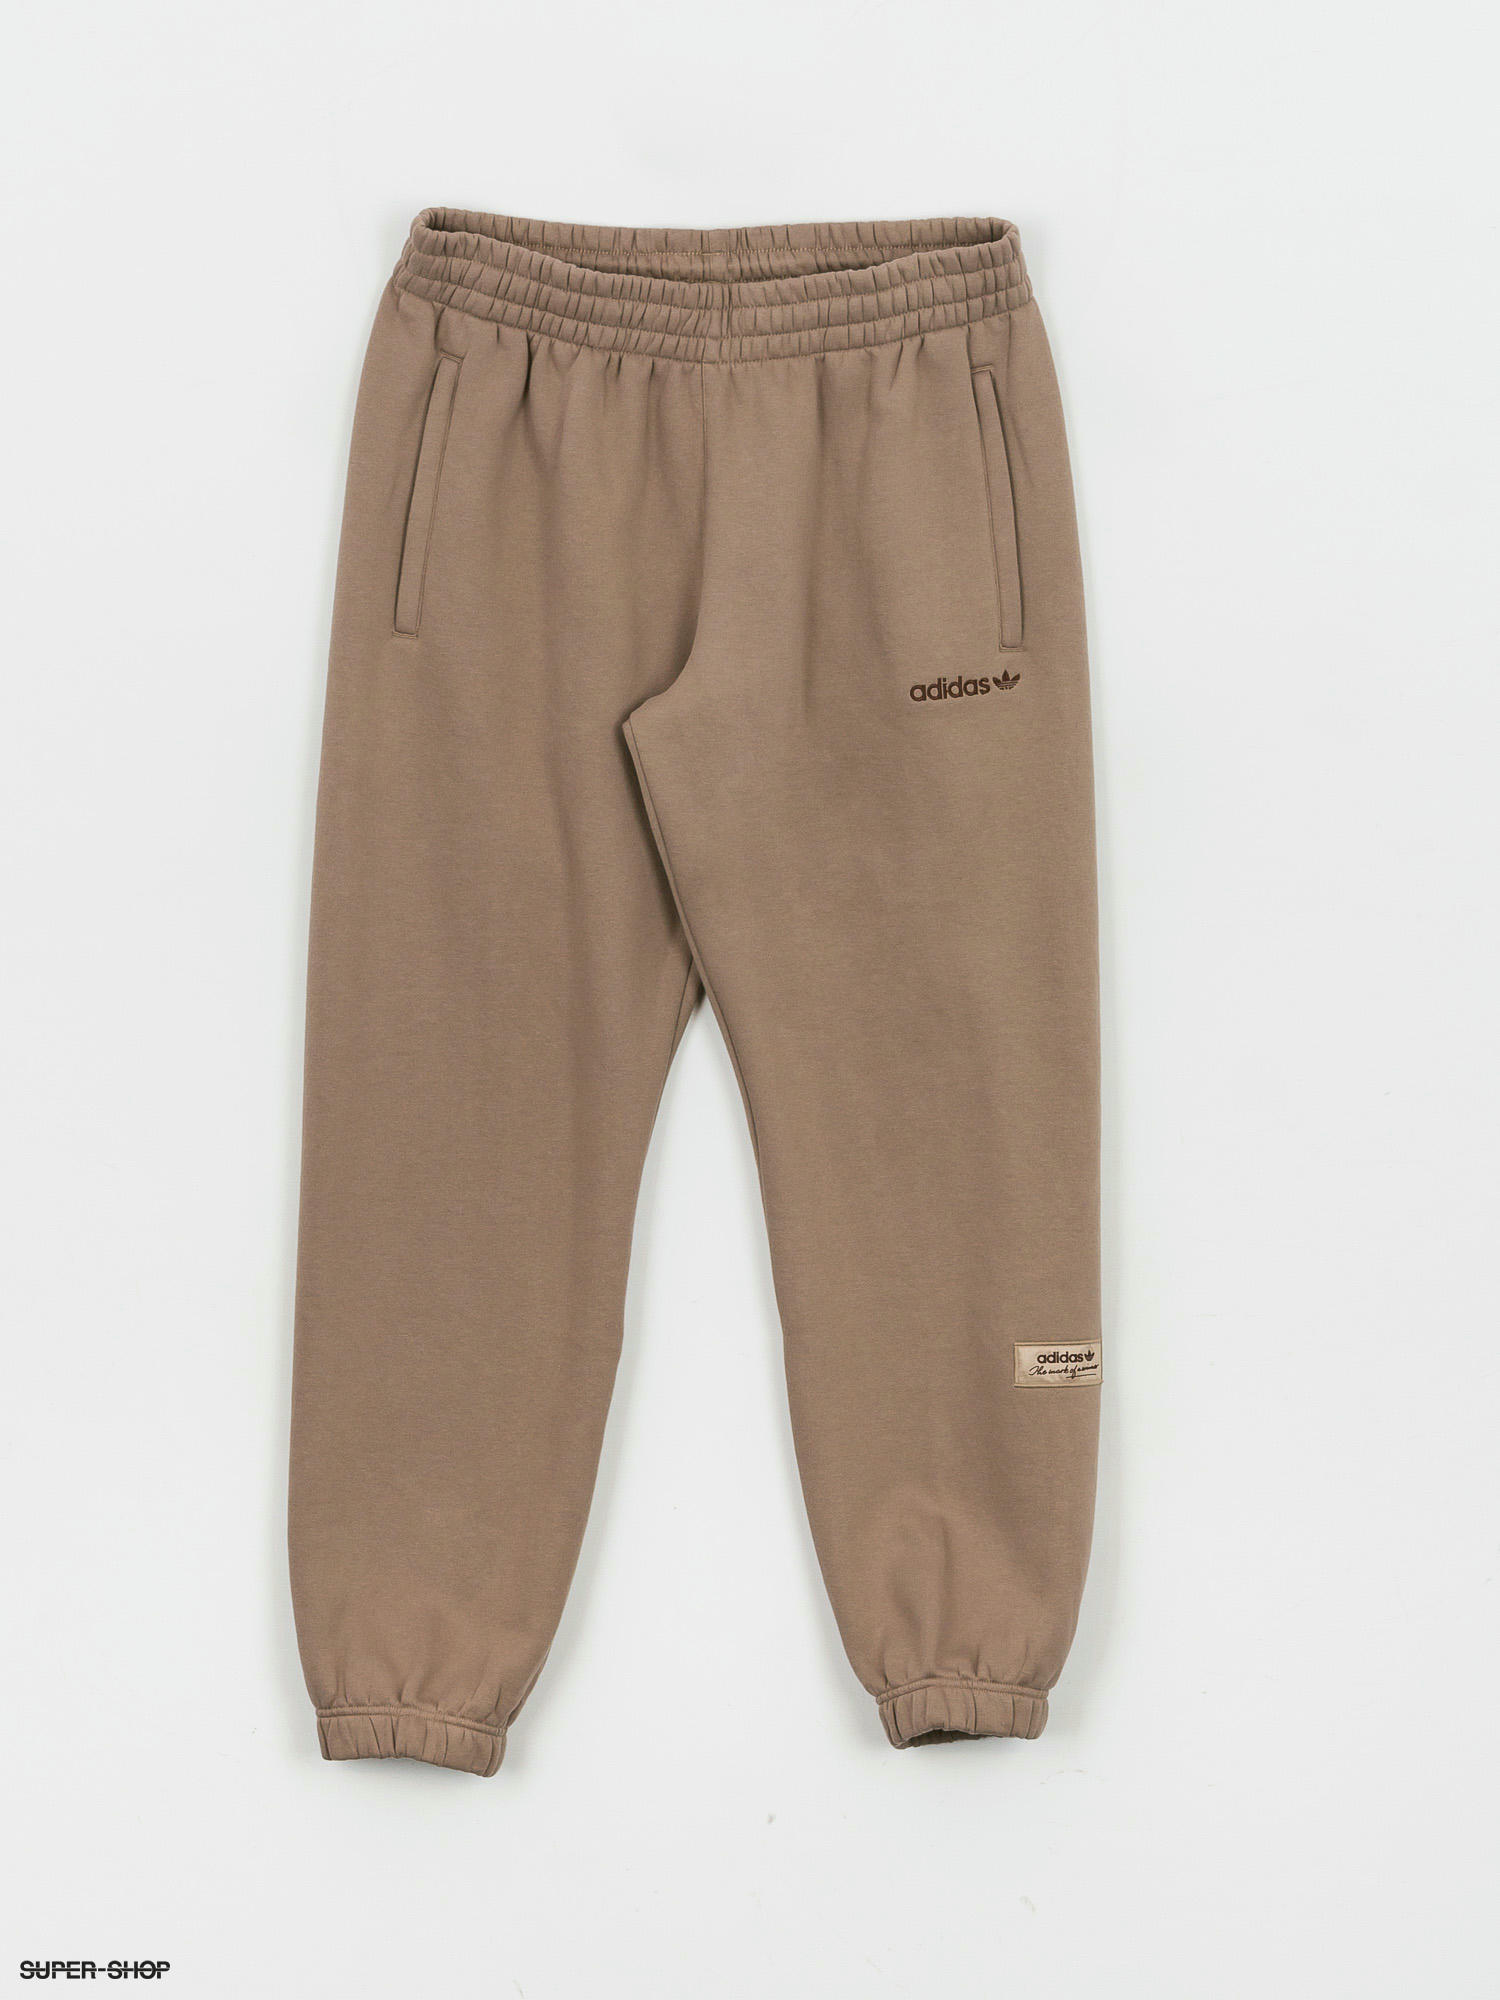 adidas Originals TRF Linear Pants brown) (chalky